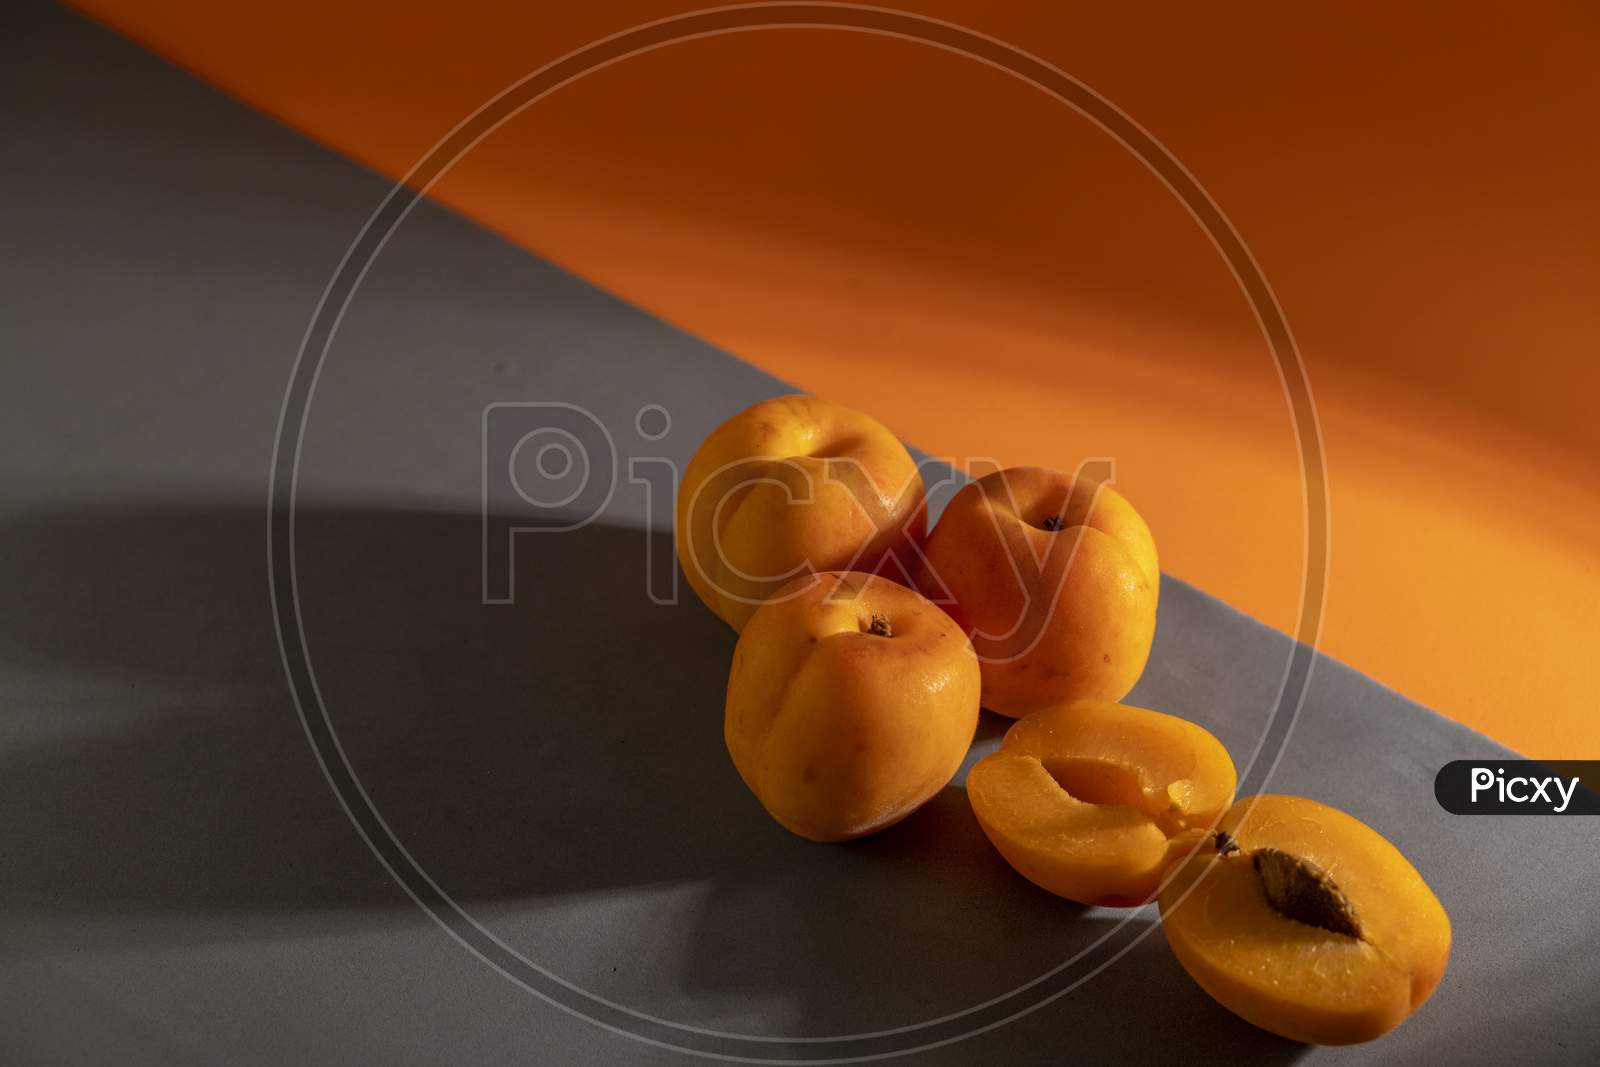 Juicy peach on a orange and grey background.